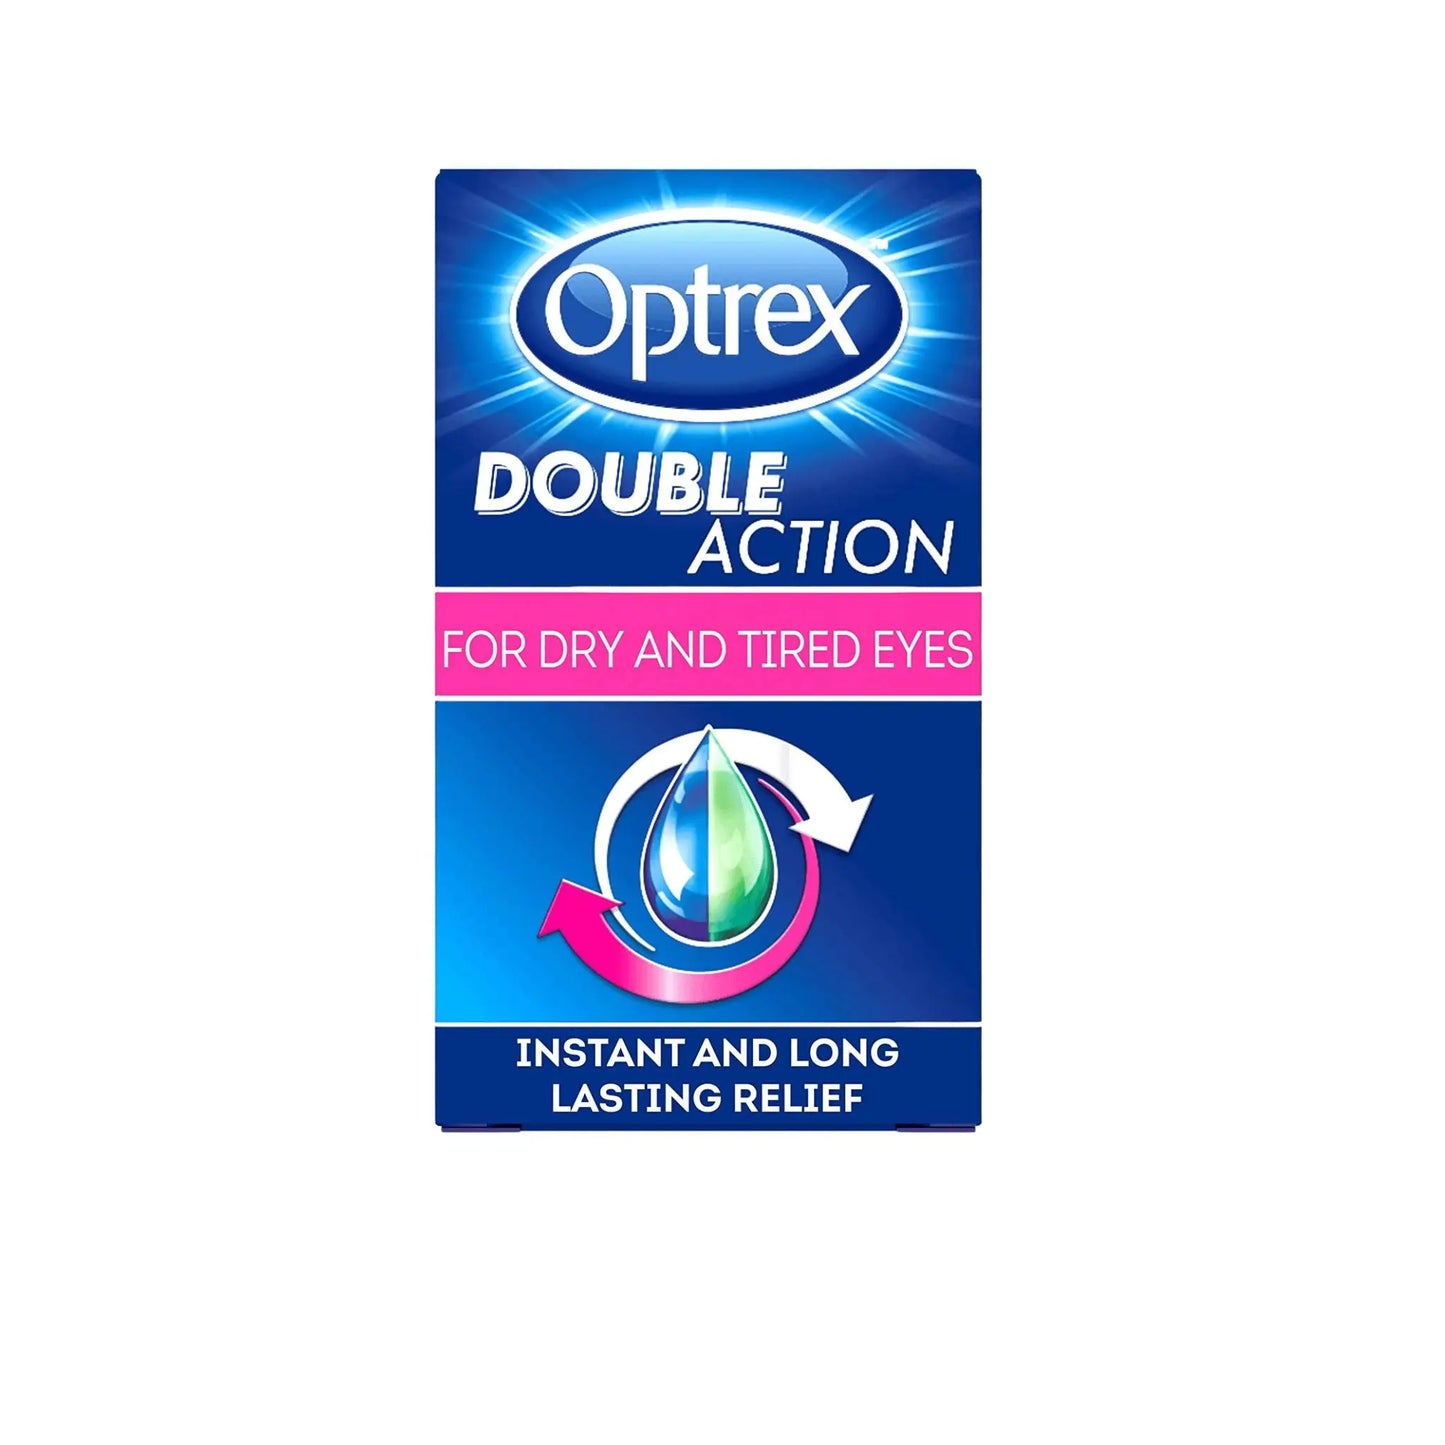 Optrex Double Action Eye Drops for Dry & Tired Eyes - 10ml